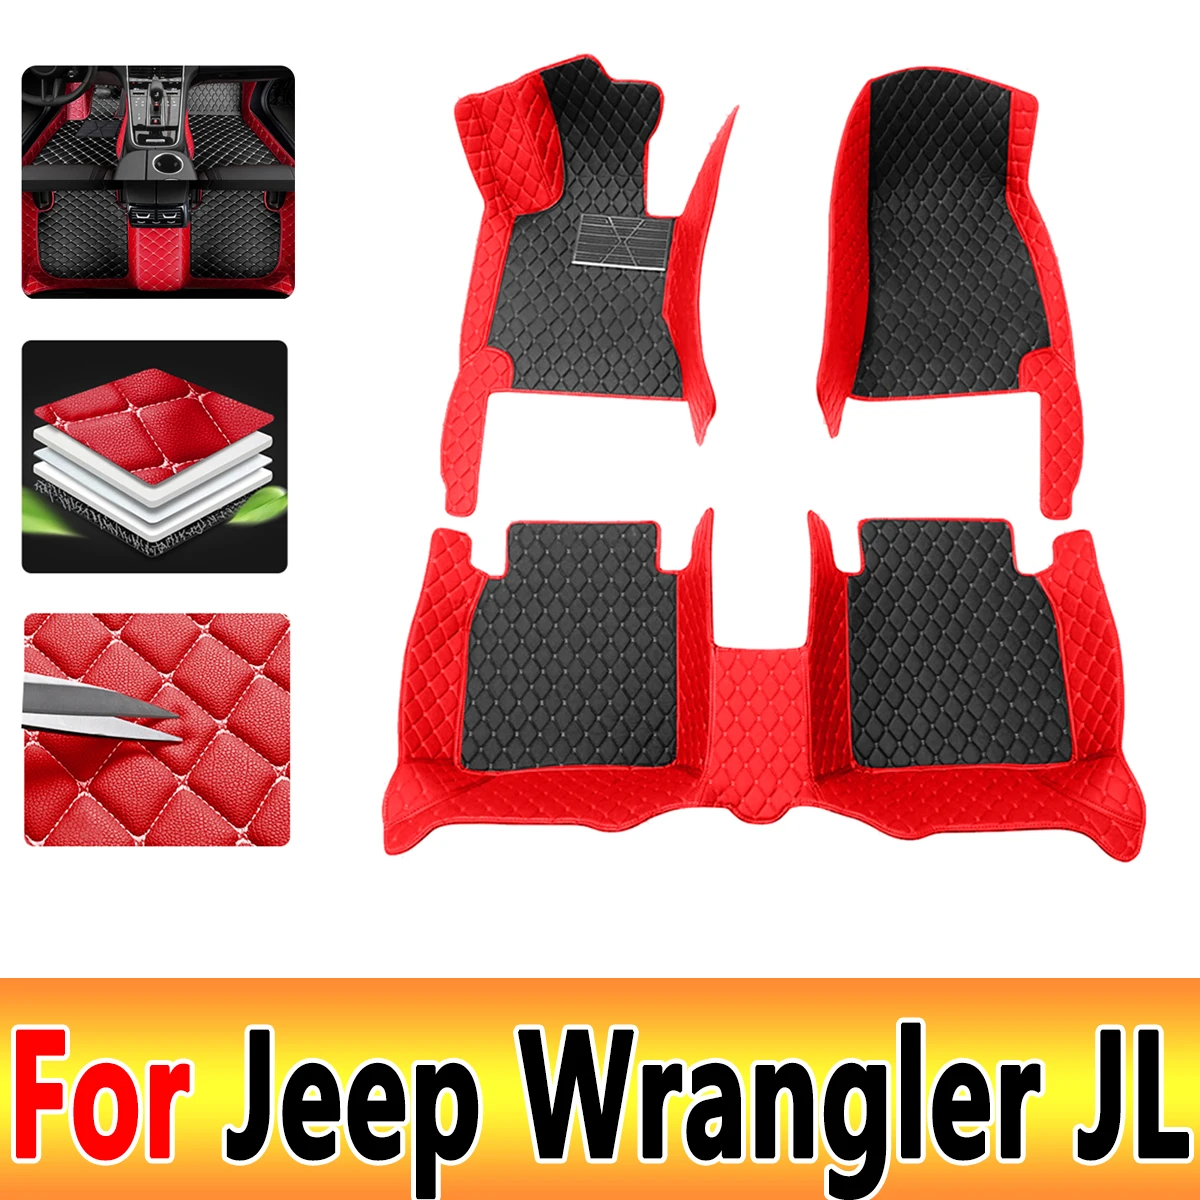 

For Jeep Wrangler JL 4 door 2021 2020 2019 2018 Car Floor Mats Styling Decoration Protect Accessories Rugs Waterproof Covers